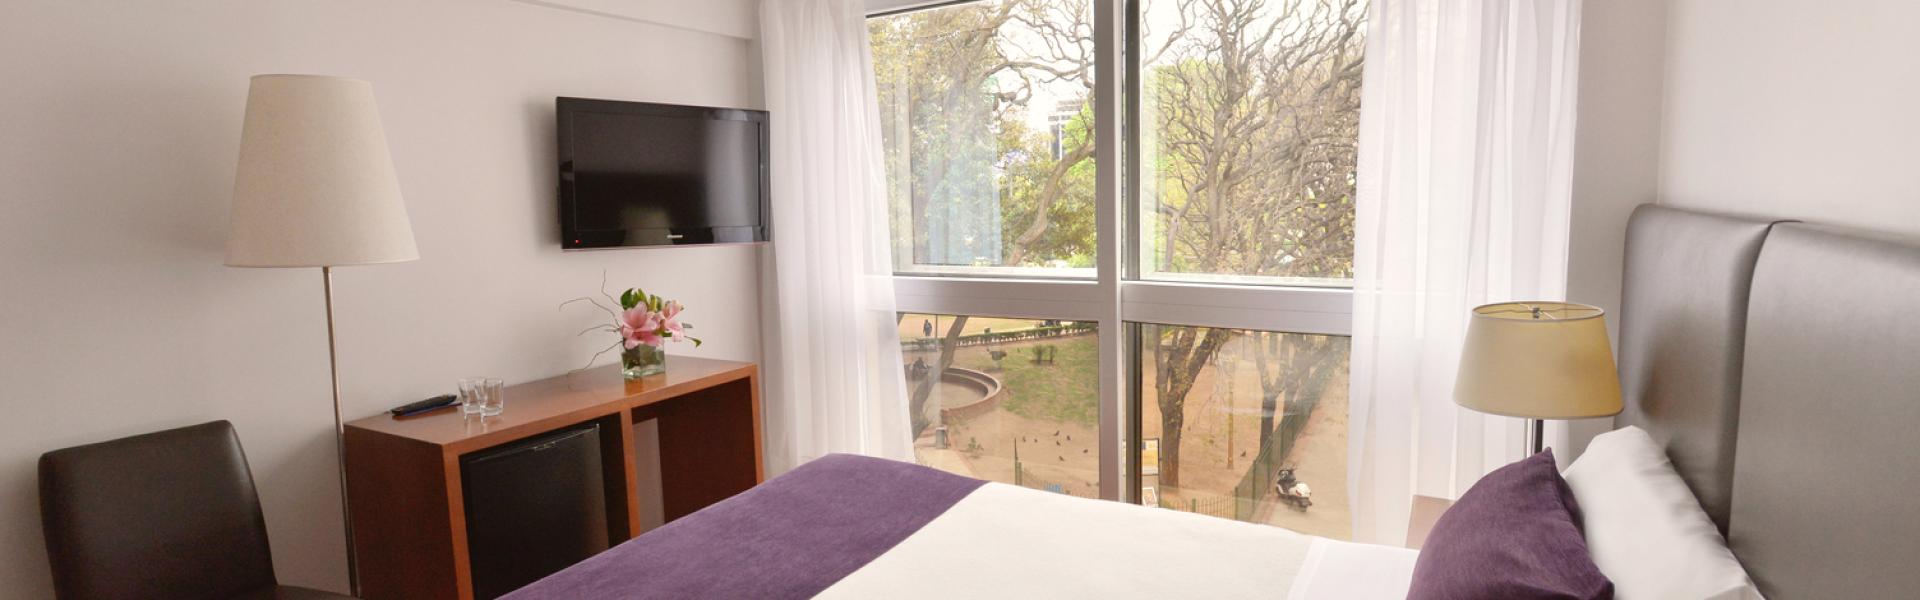 Reserve your room in a privileged location in Buenos Aires and start enjoying your vacation!